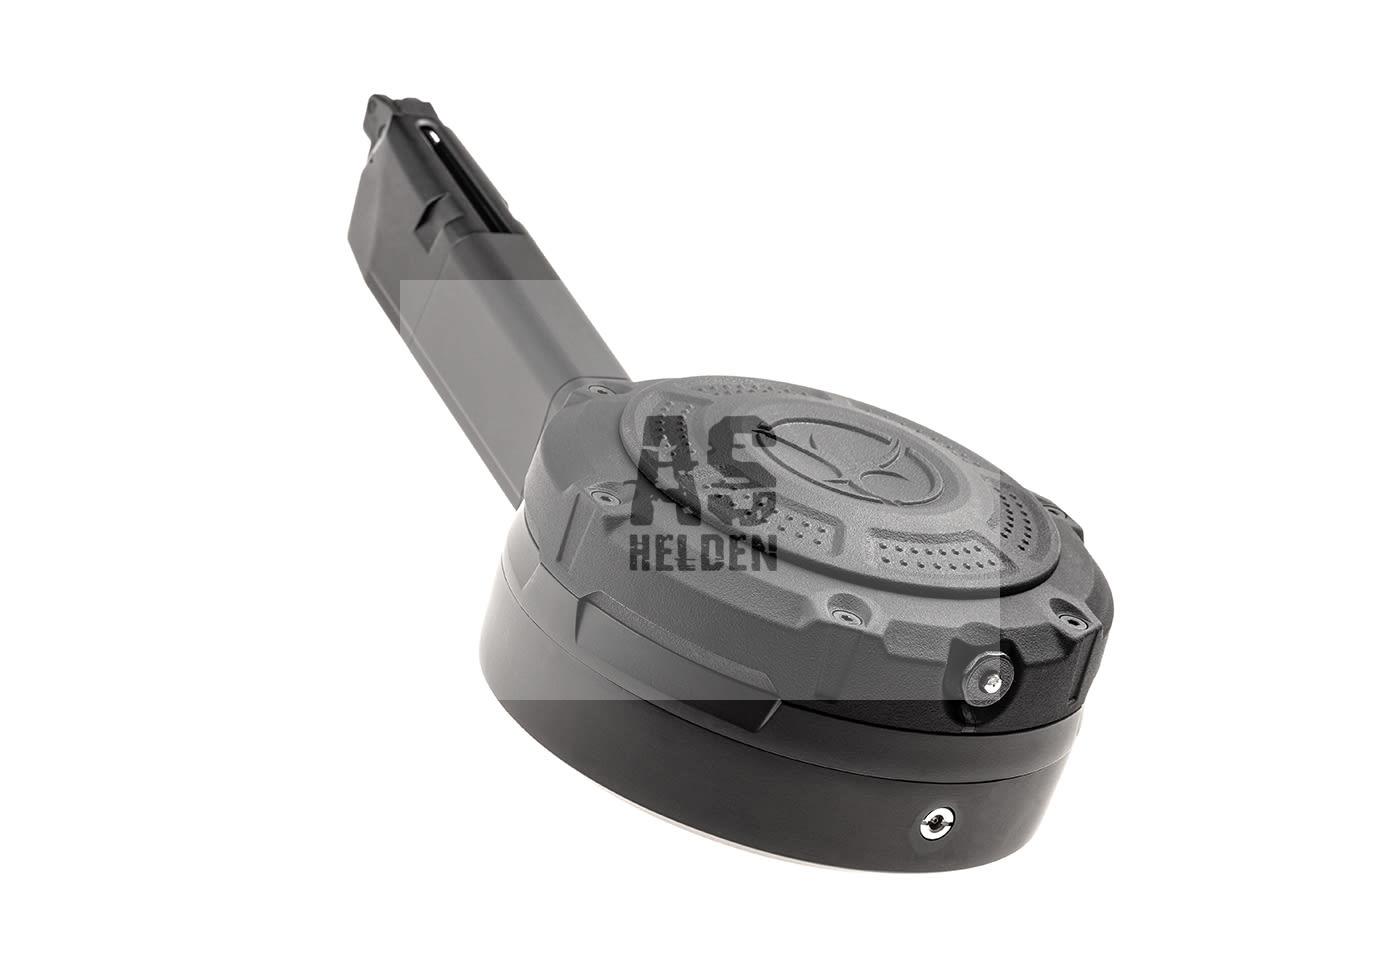 Drum Magazine AAP01 GBB 350rds - (Action Army)